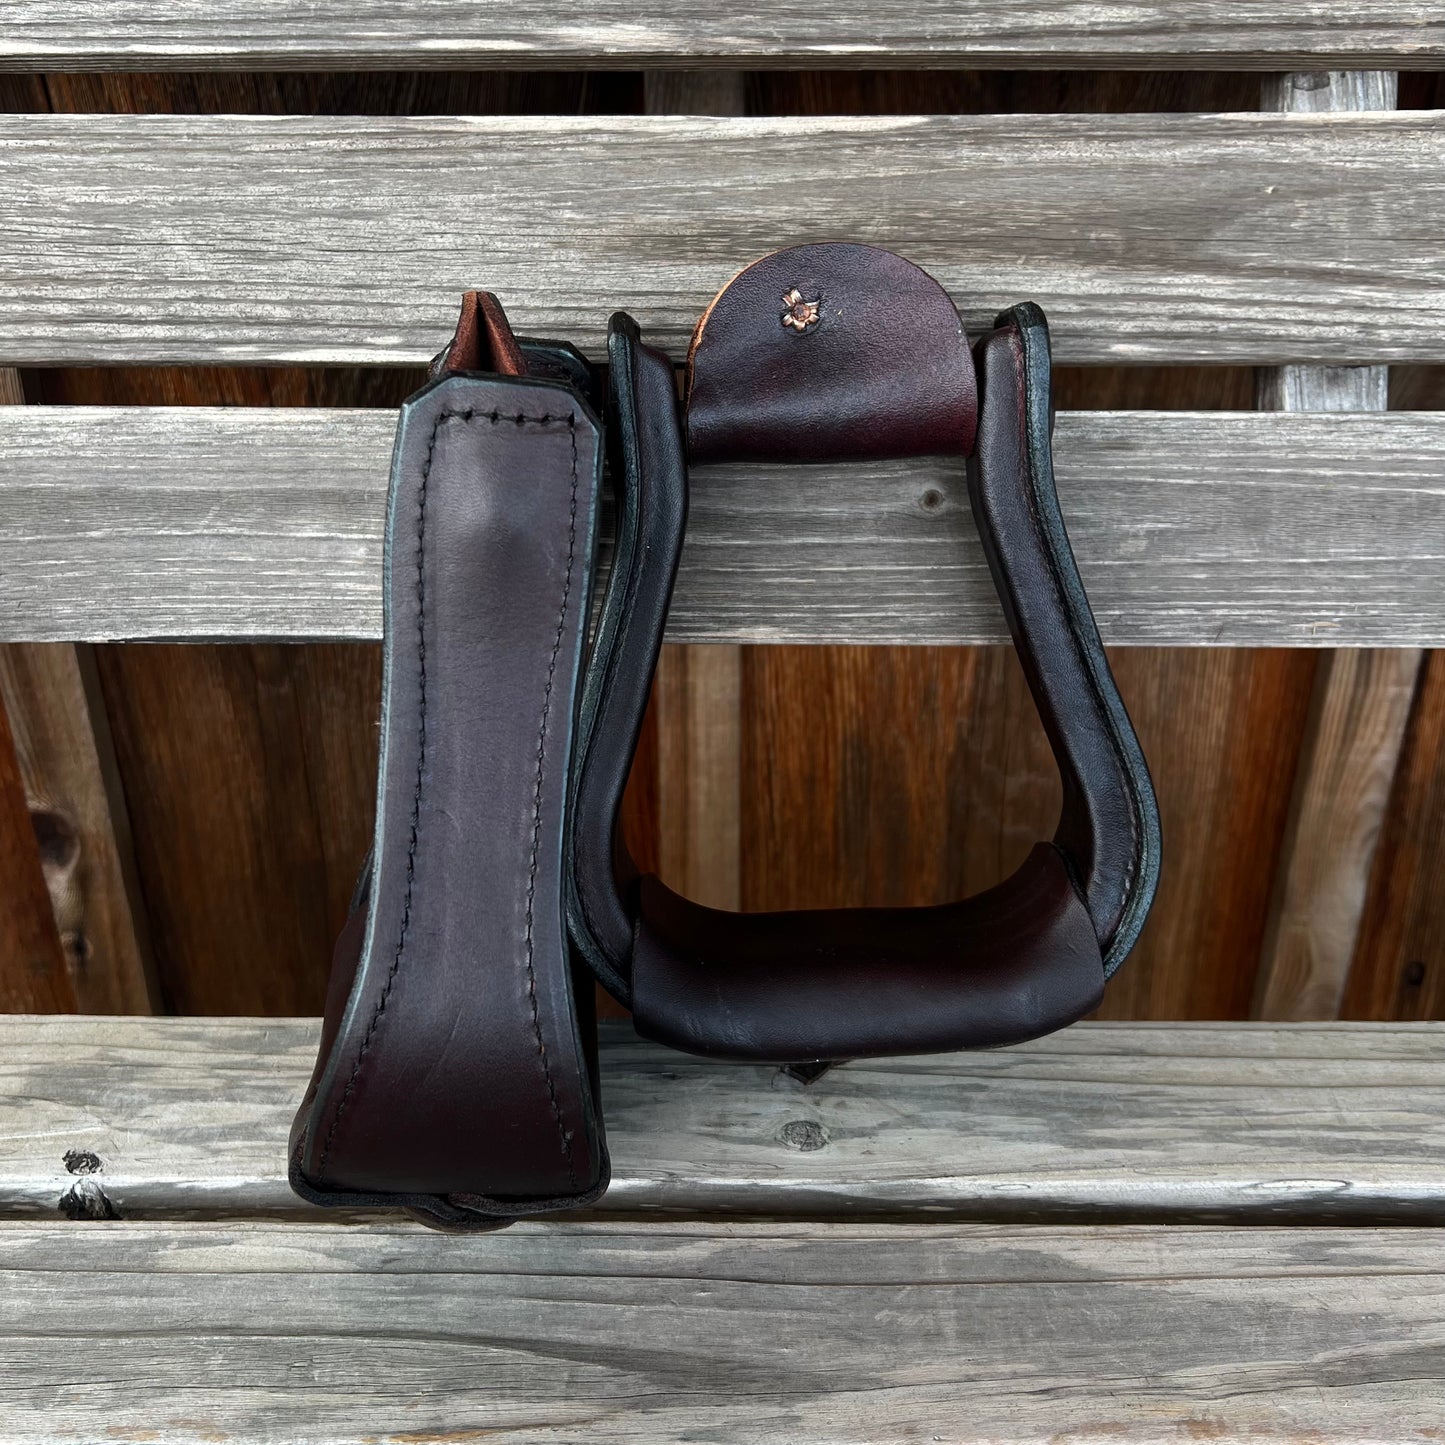 Leather Wrapped Stirrups